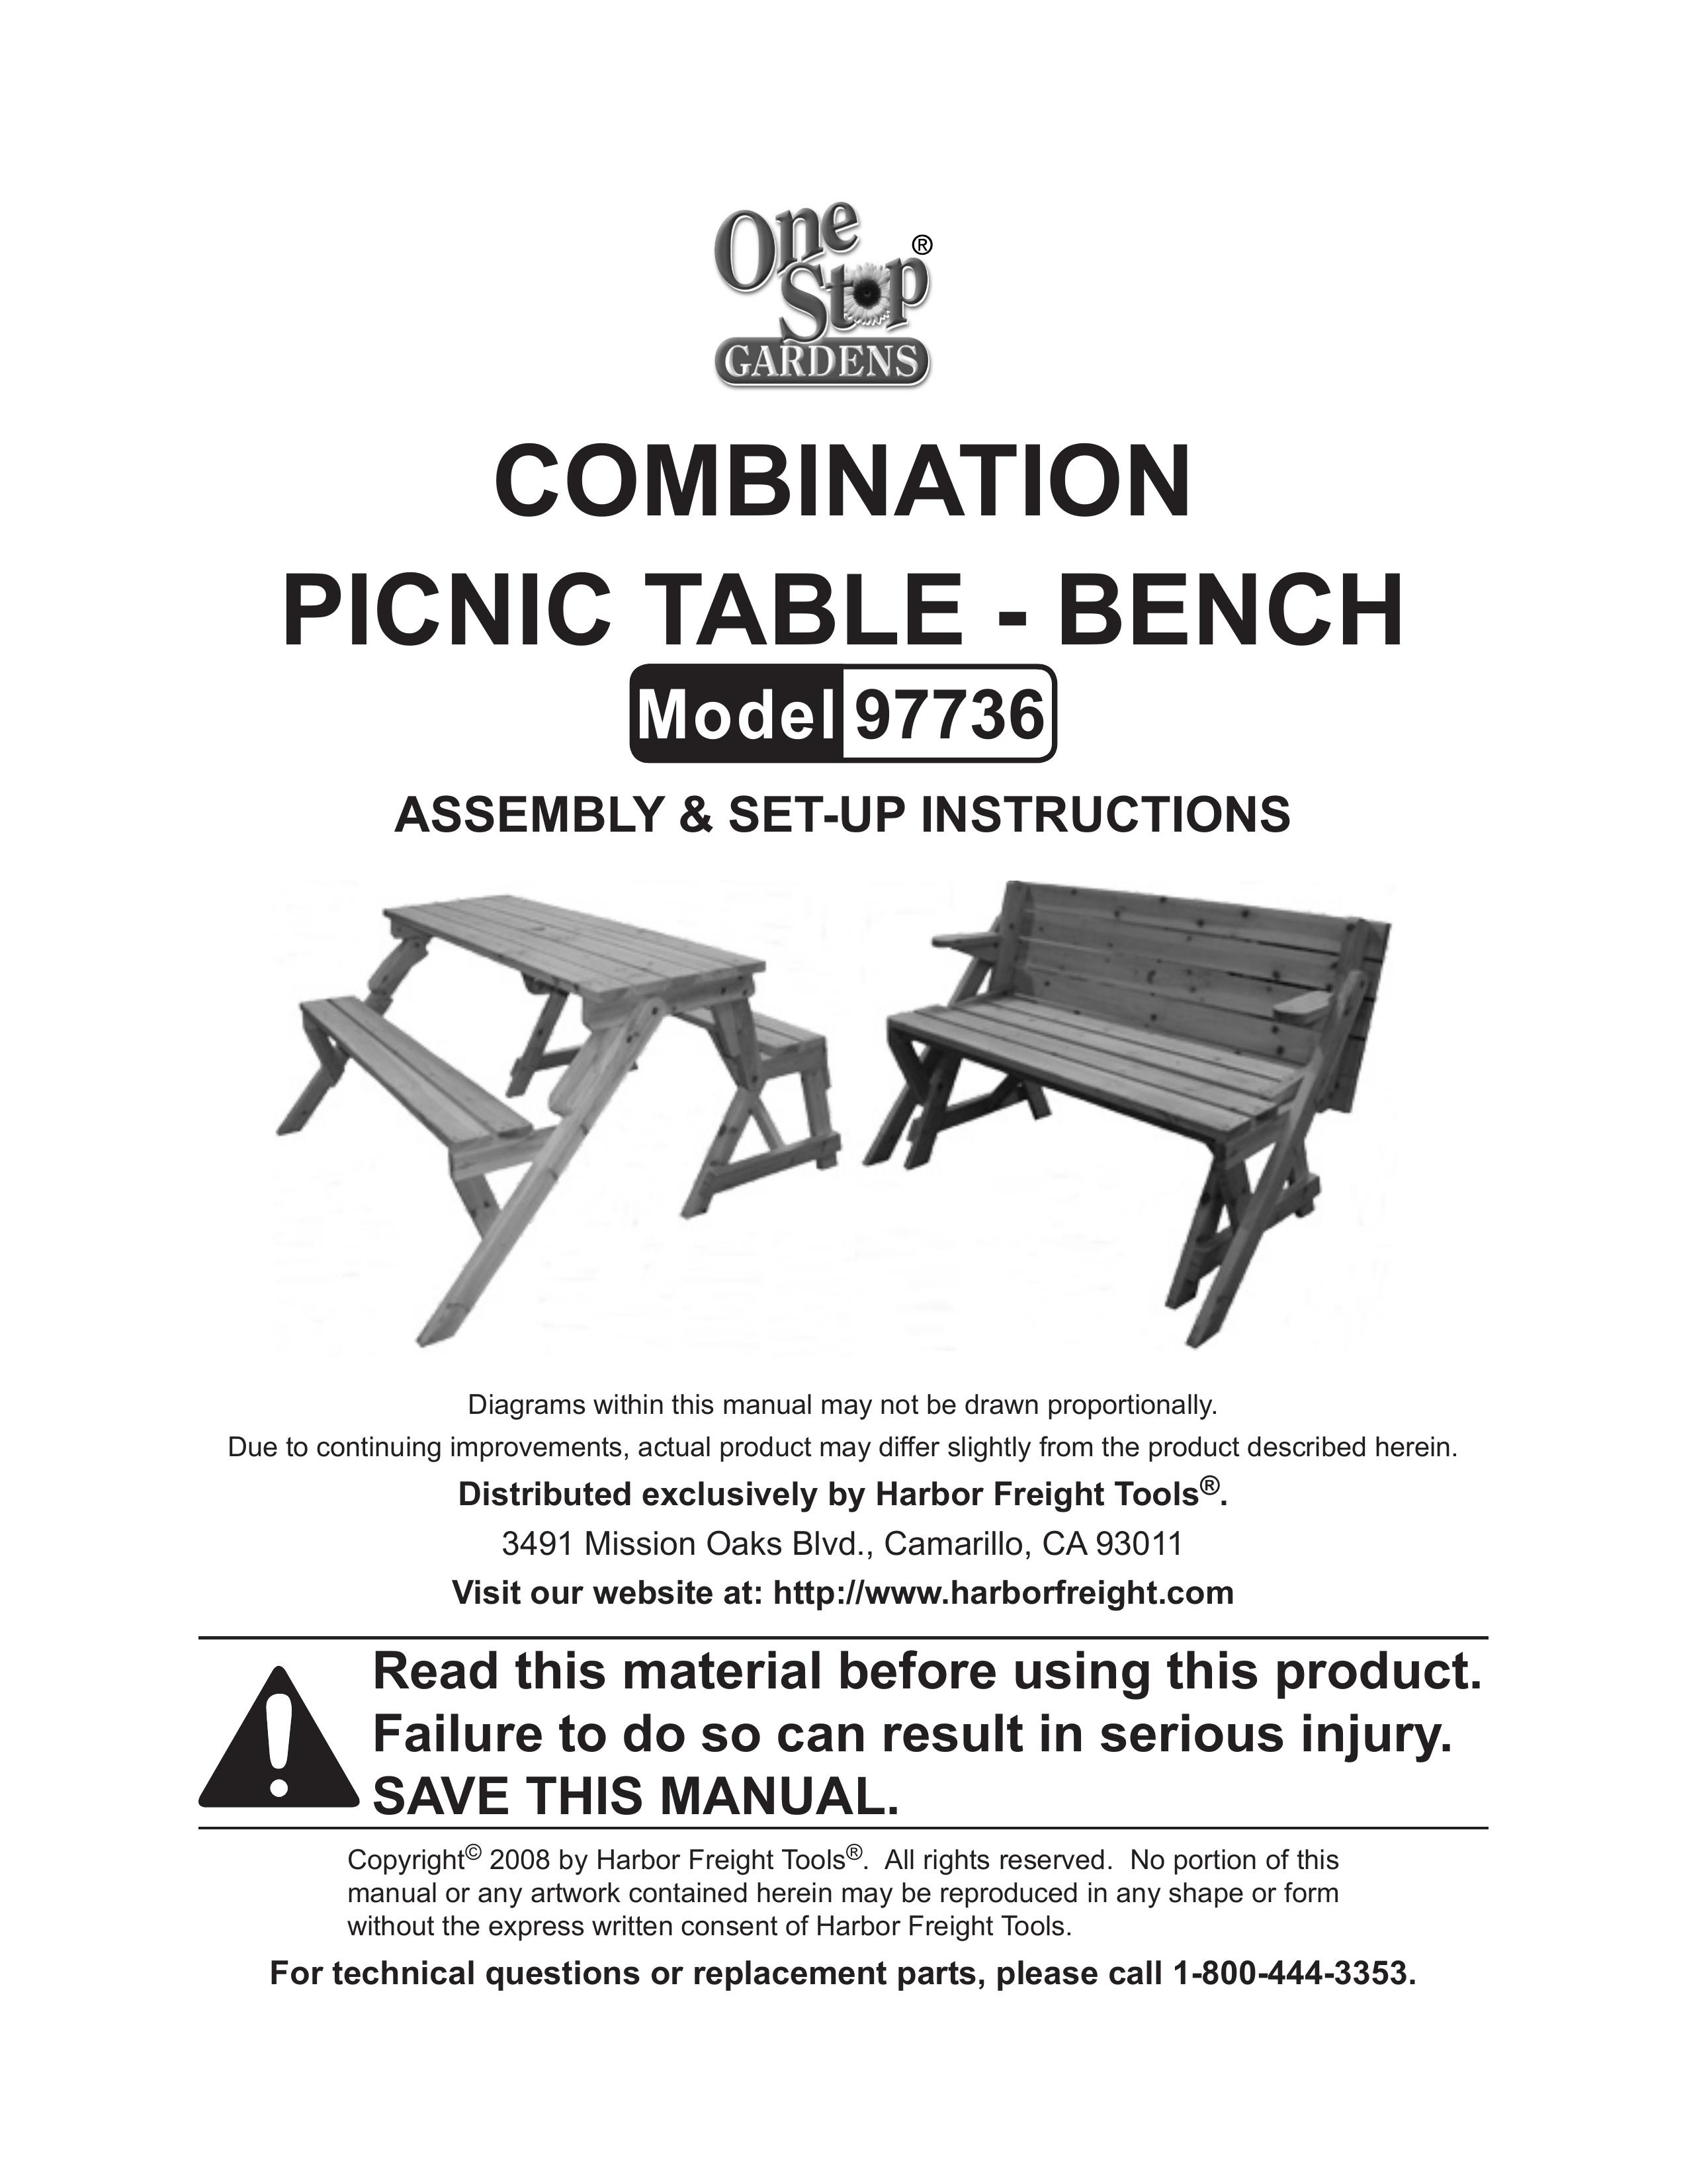 Harbor Freight Tools 97736 Picnic Table User Manual